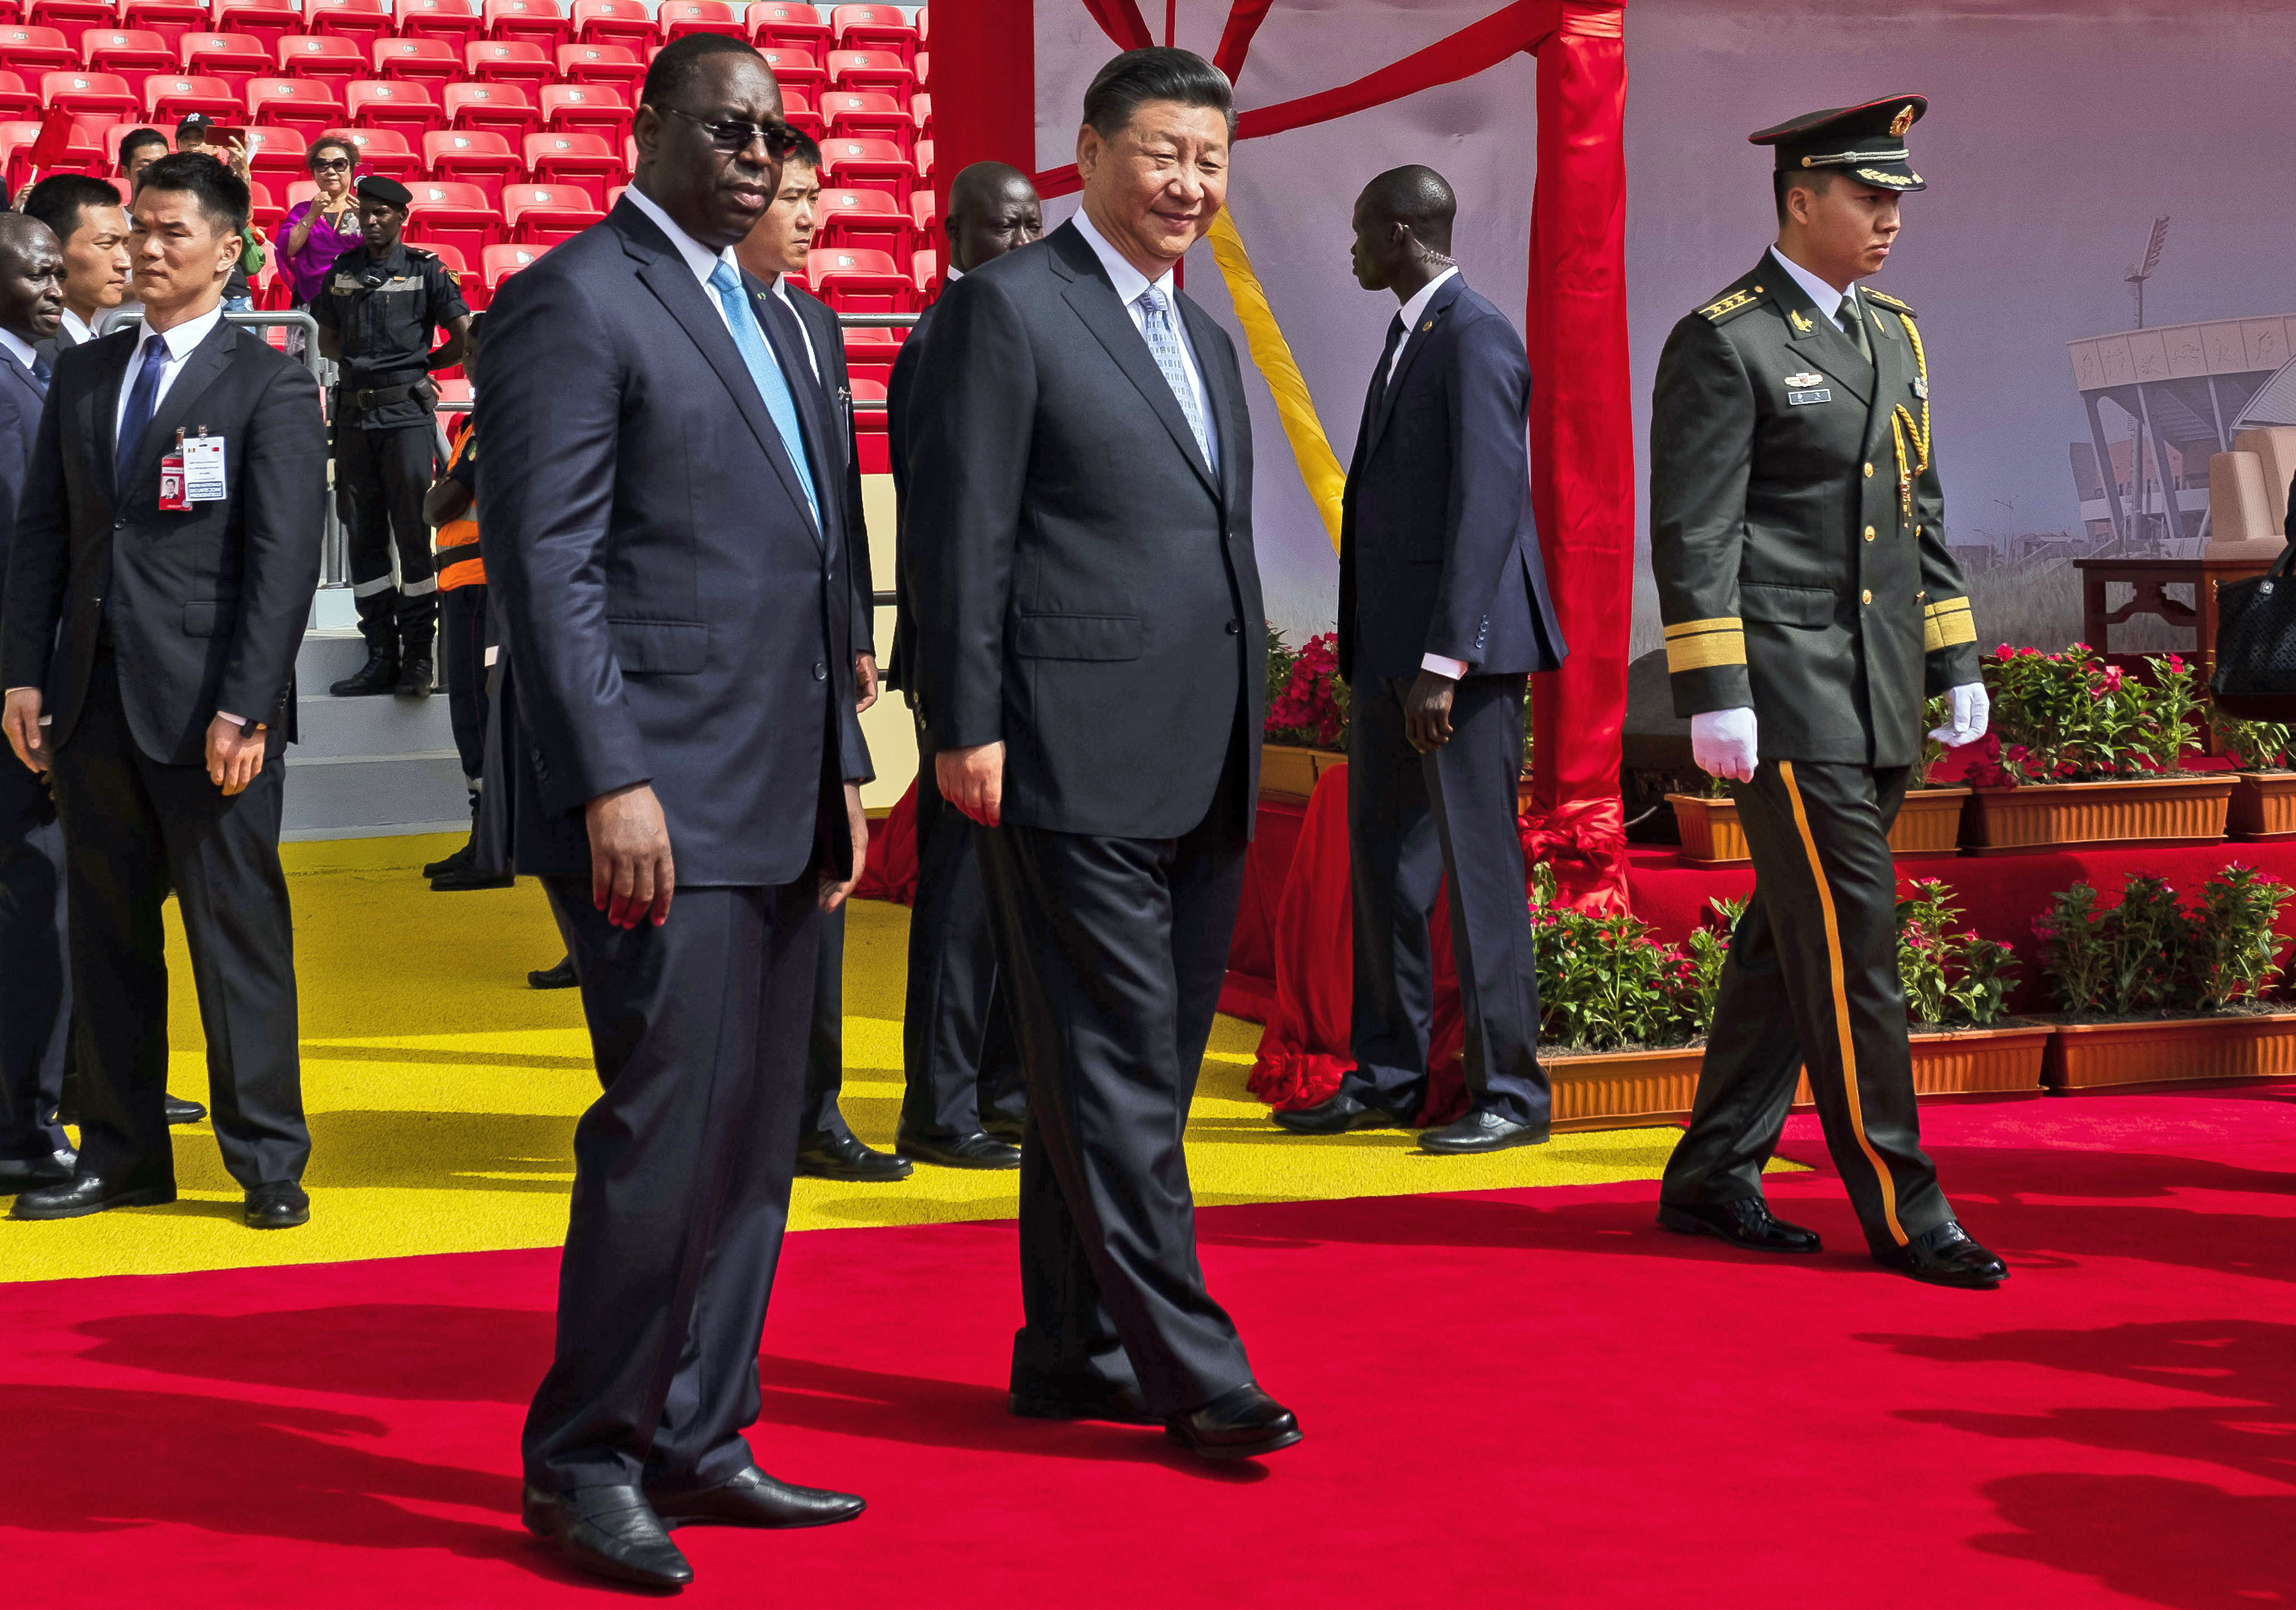 Chinese President Xi Jinping, center right, walks with Senegal's president Macky Sall during his state visit, in Dakar, Senegal, Sunday, July 22, 2018. Xi Jinping arrived in Africa on Saturday on a four-nation visit, seeking deeper military and economic ties. (AP Photo/Xaume Olleros)